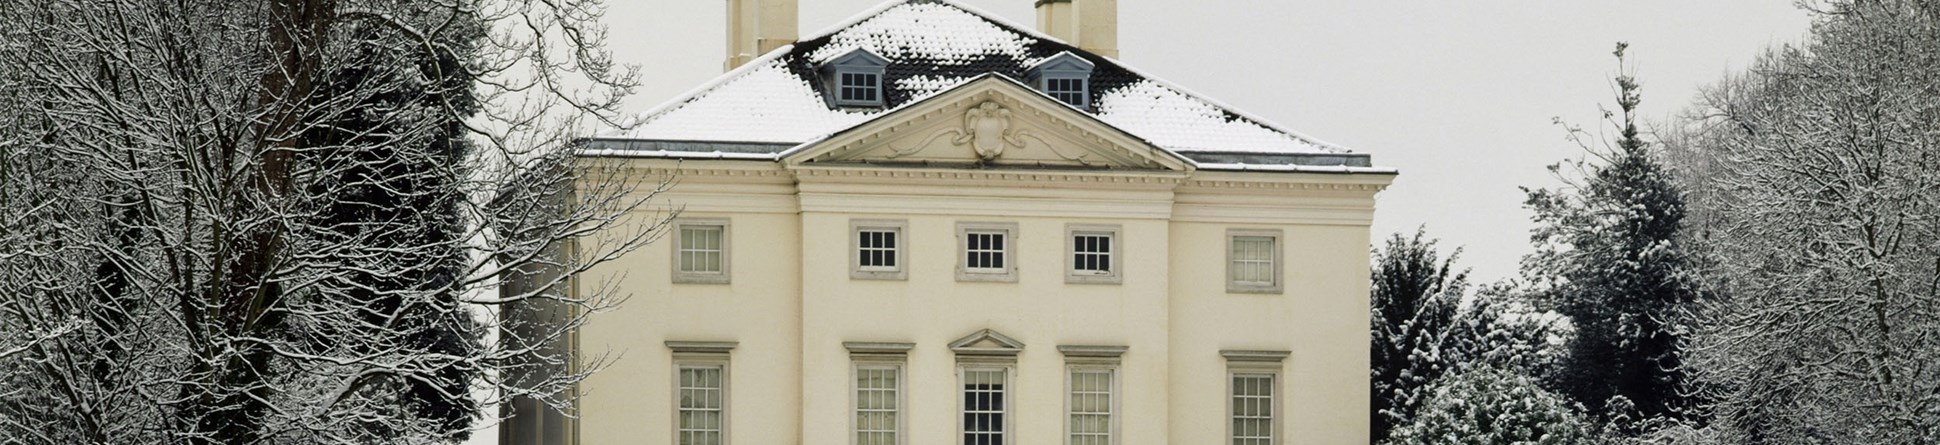 Image of the exterior of Marble Hill House, Richmond, in the snow.